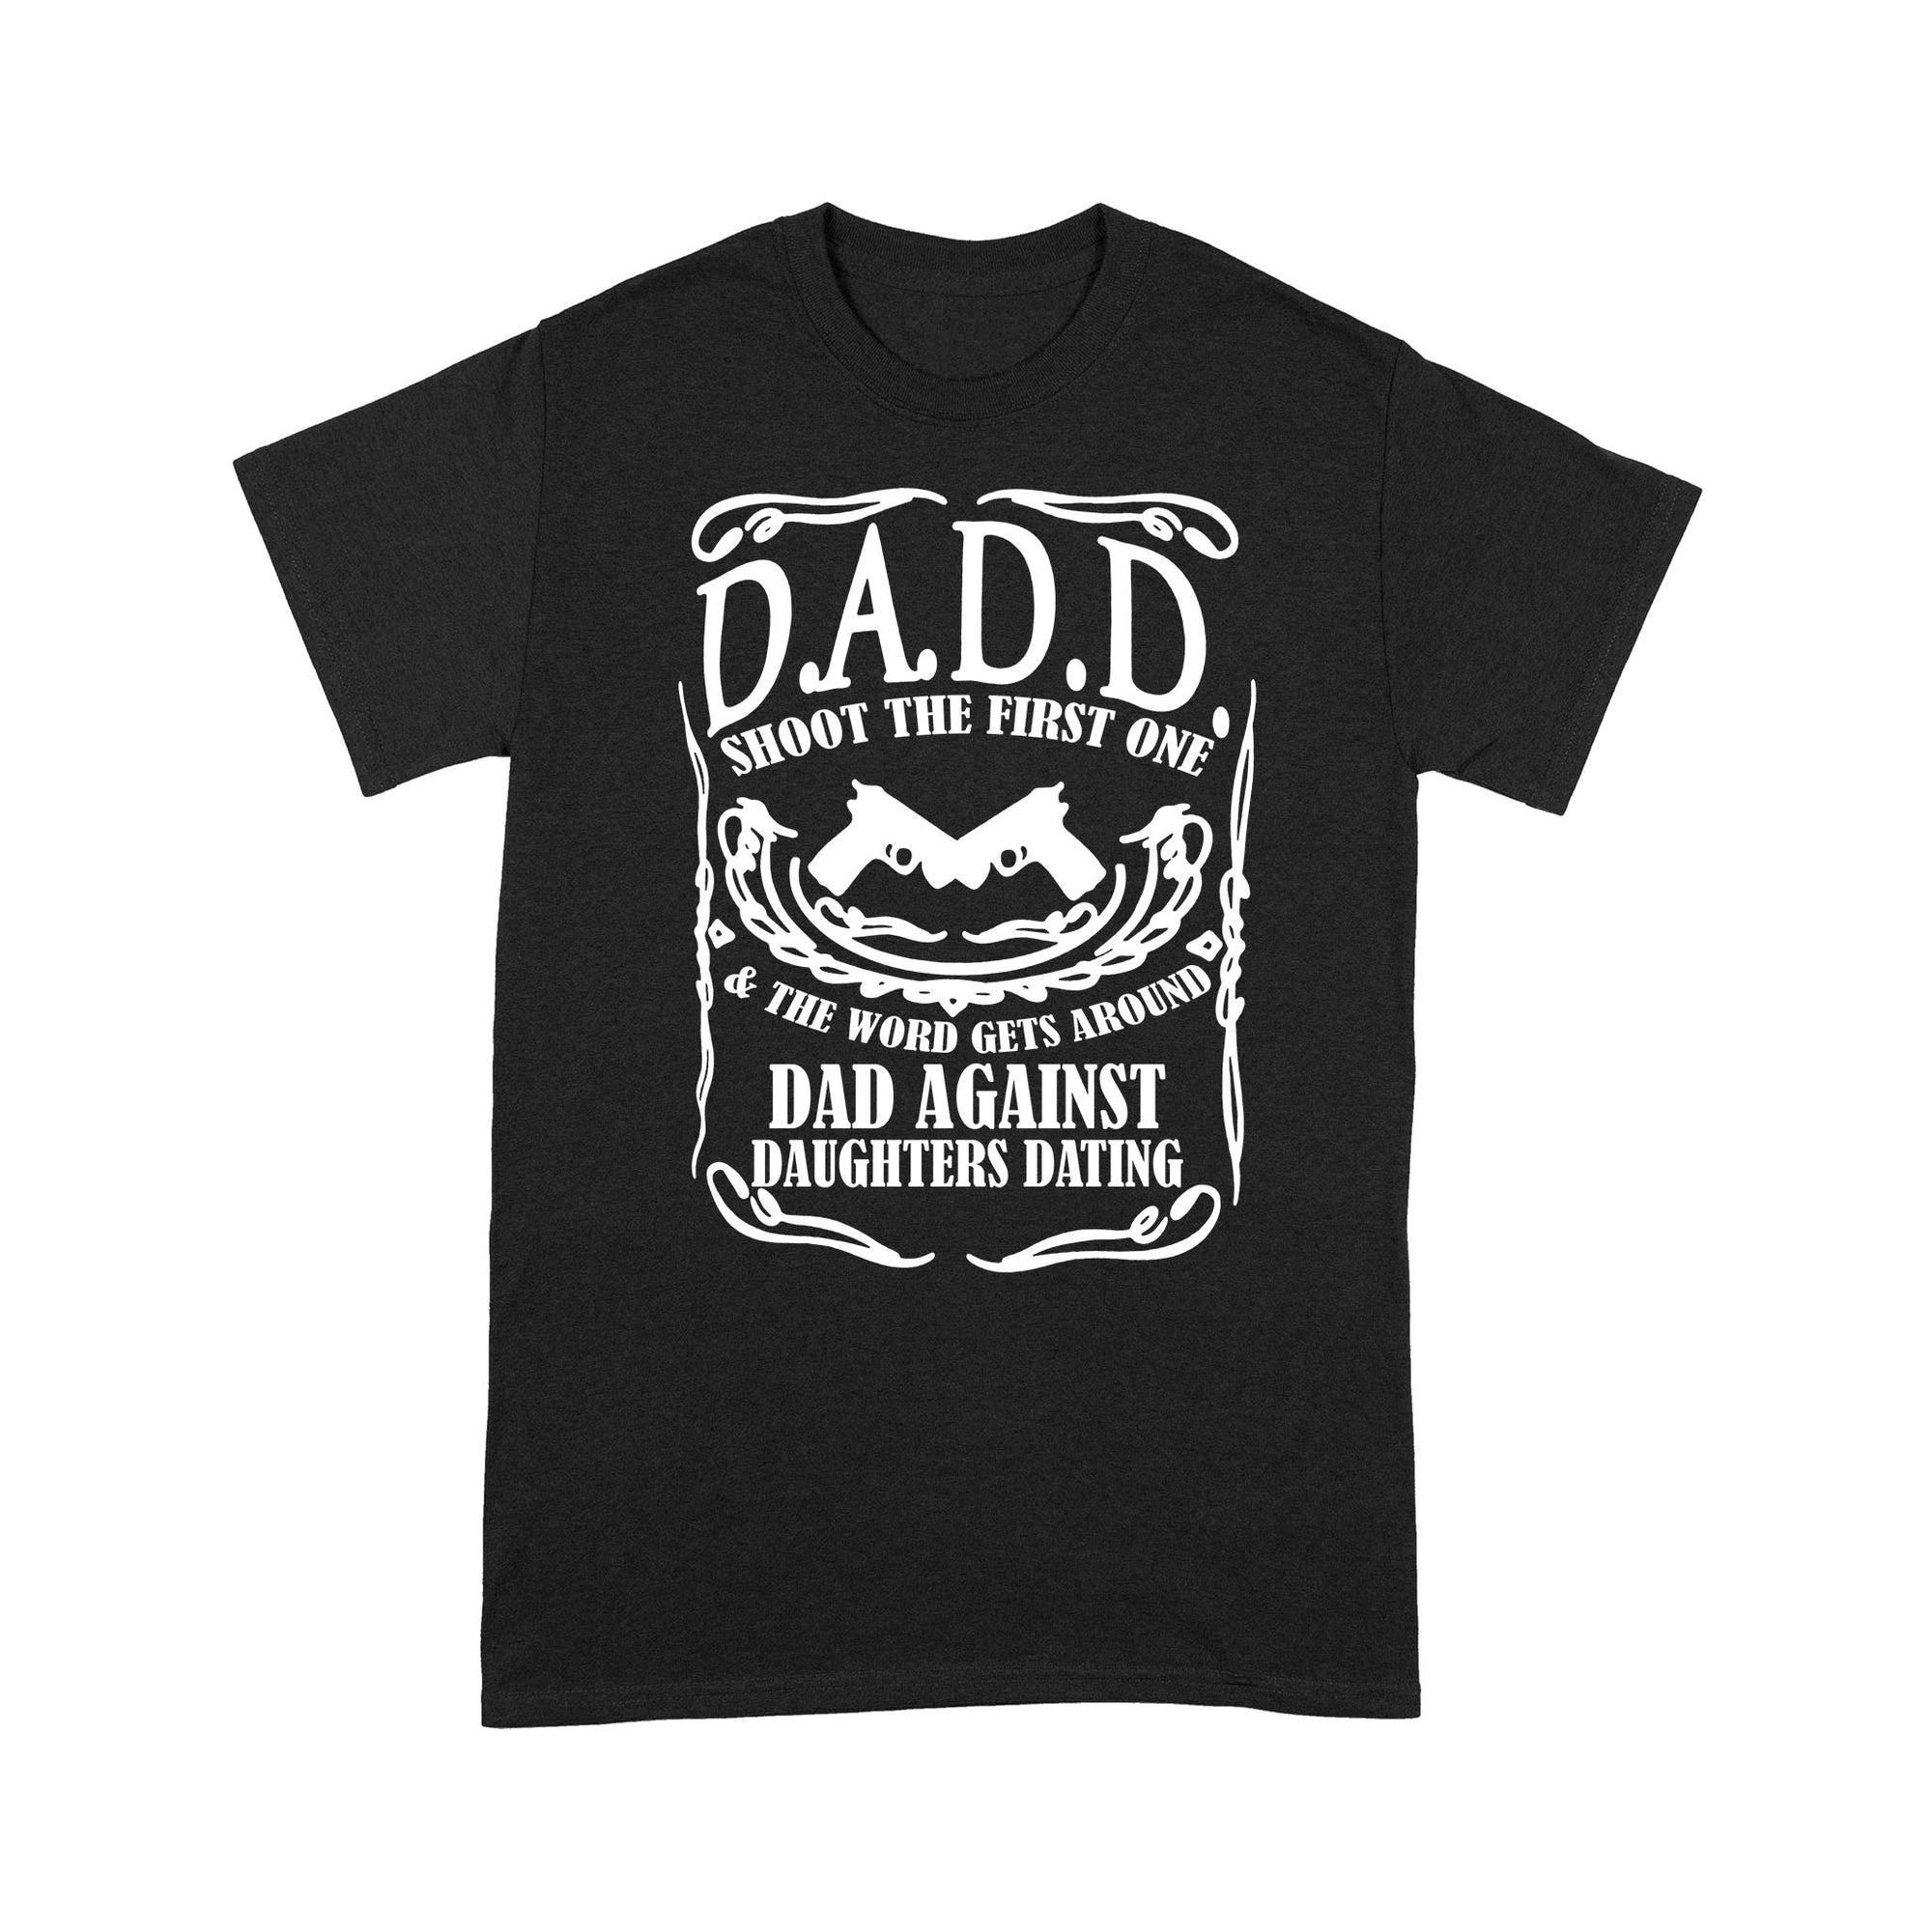 DADD Shoot The First One And The Word Gets Around Dads Against Daughters Dating Funny Gift Ideas for Dad Father - Standard T-shirt